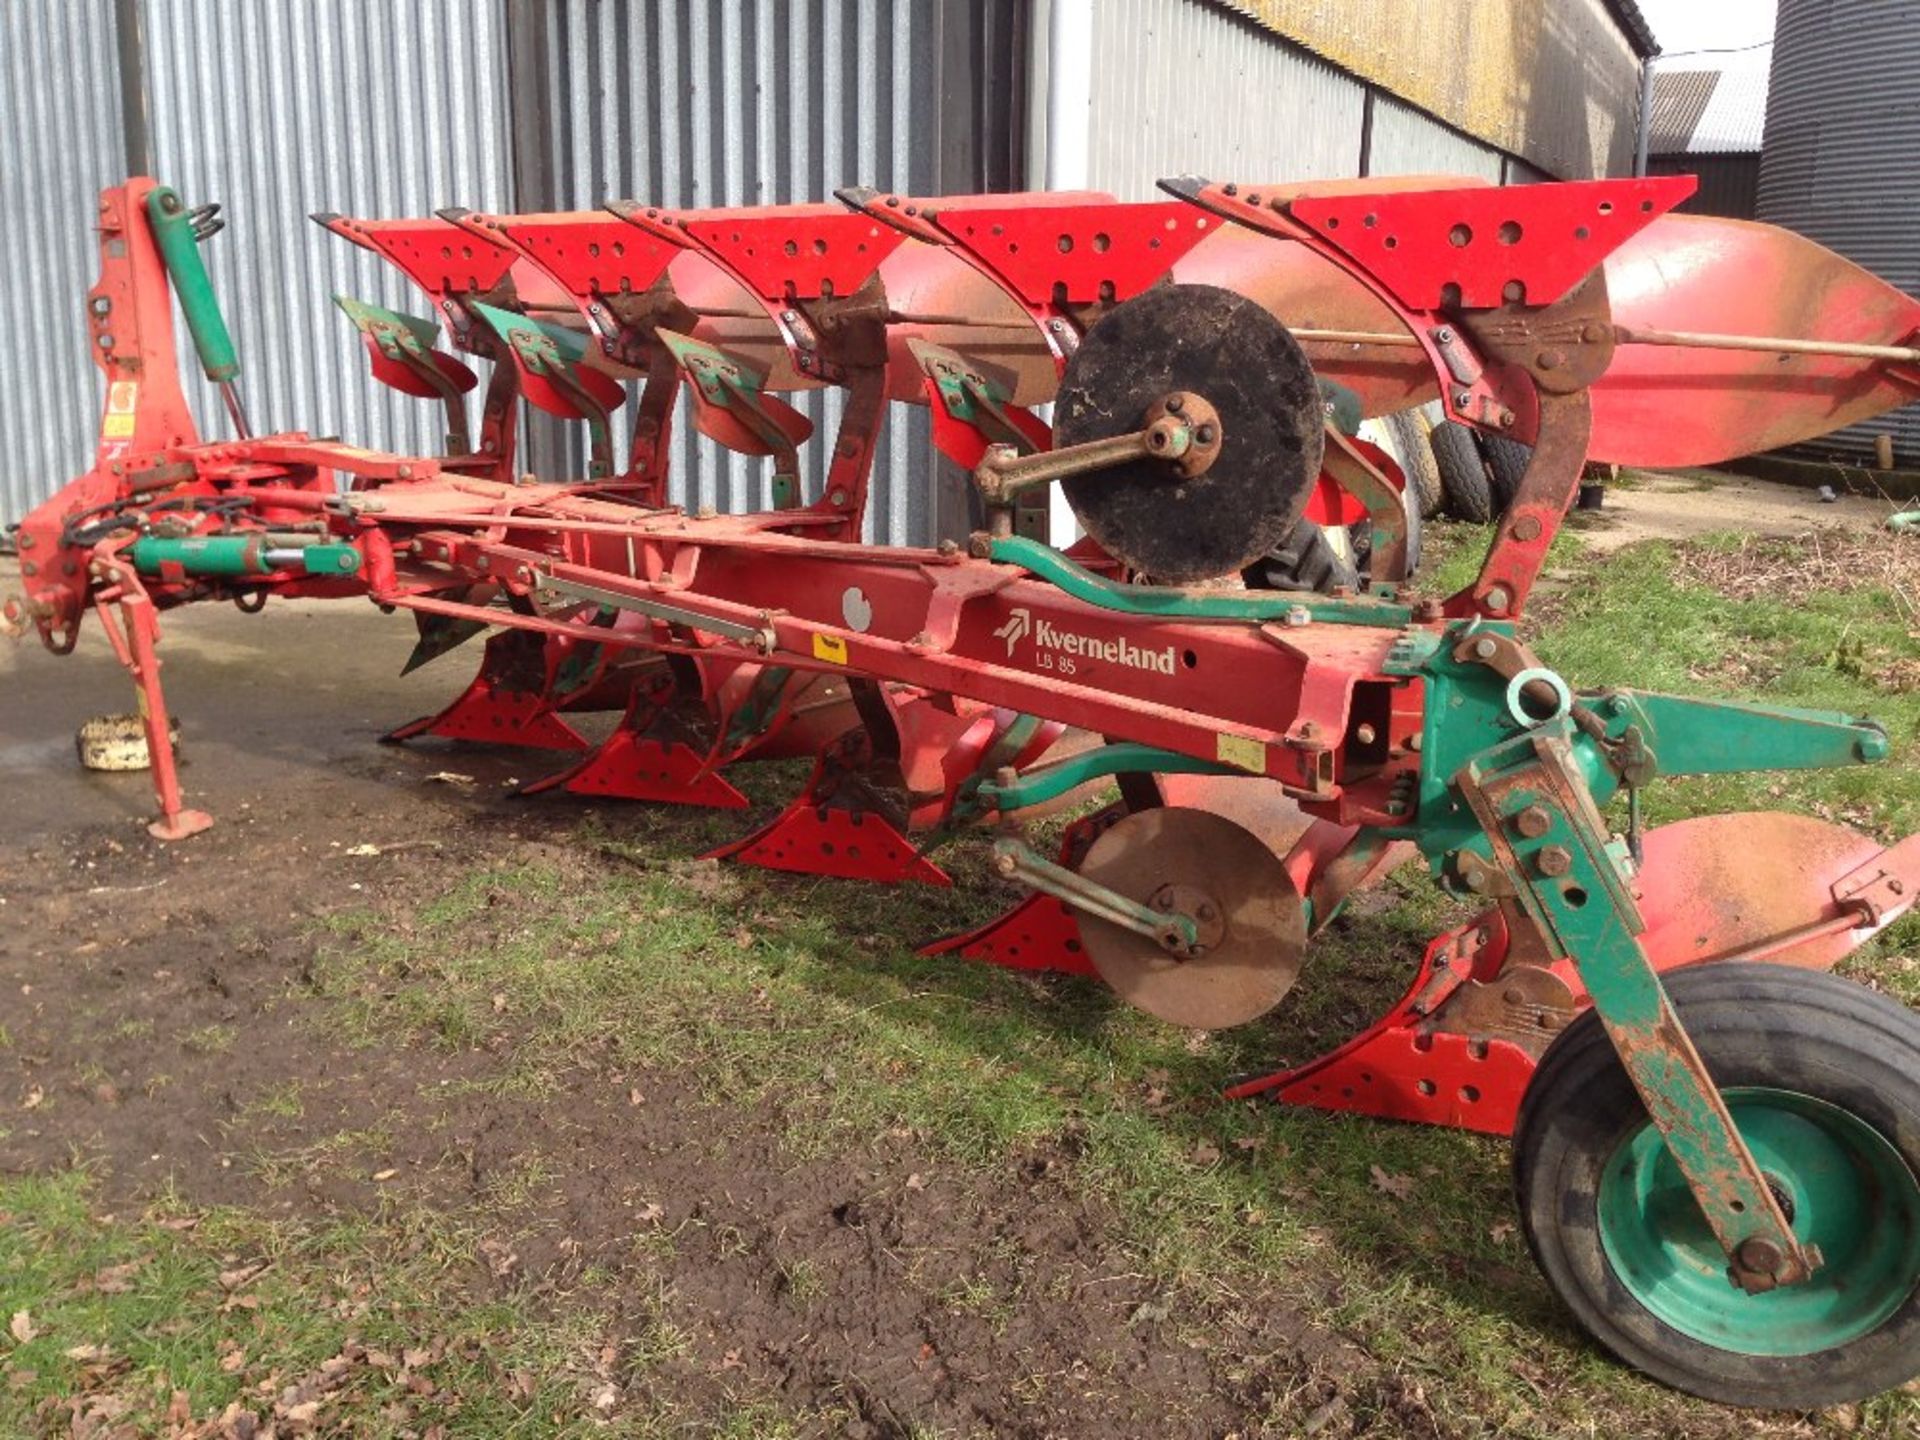 5 Furrow Kverneland plough, model number LB-85-300-5-HD, 2004. New turn over valve fitted 2018. - Image 2 of 8